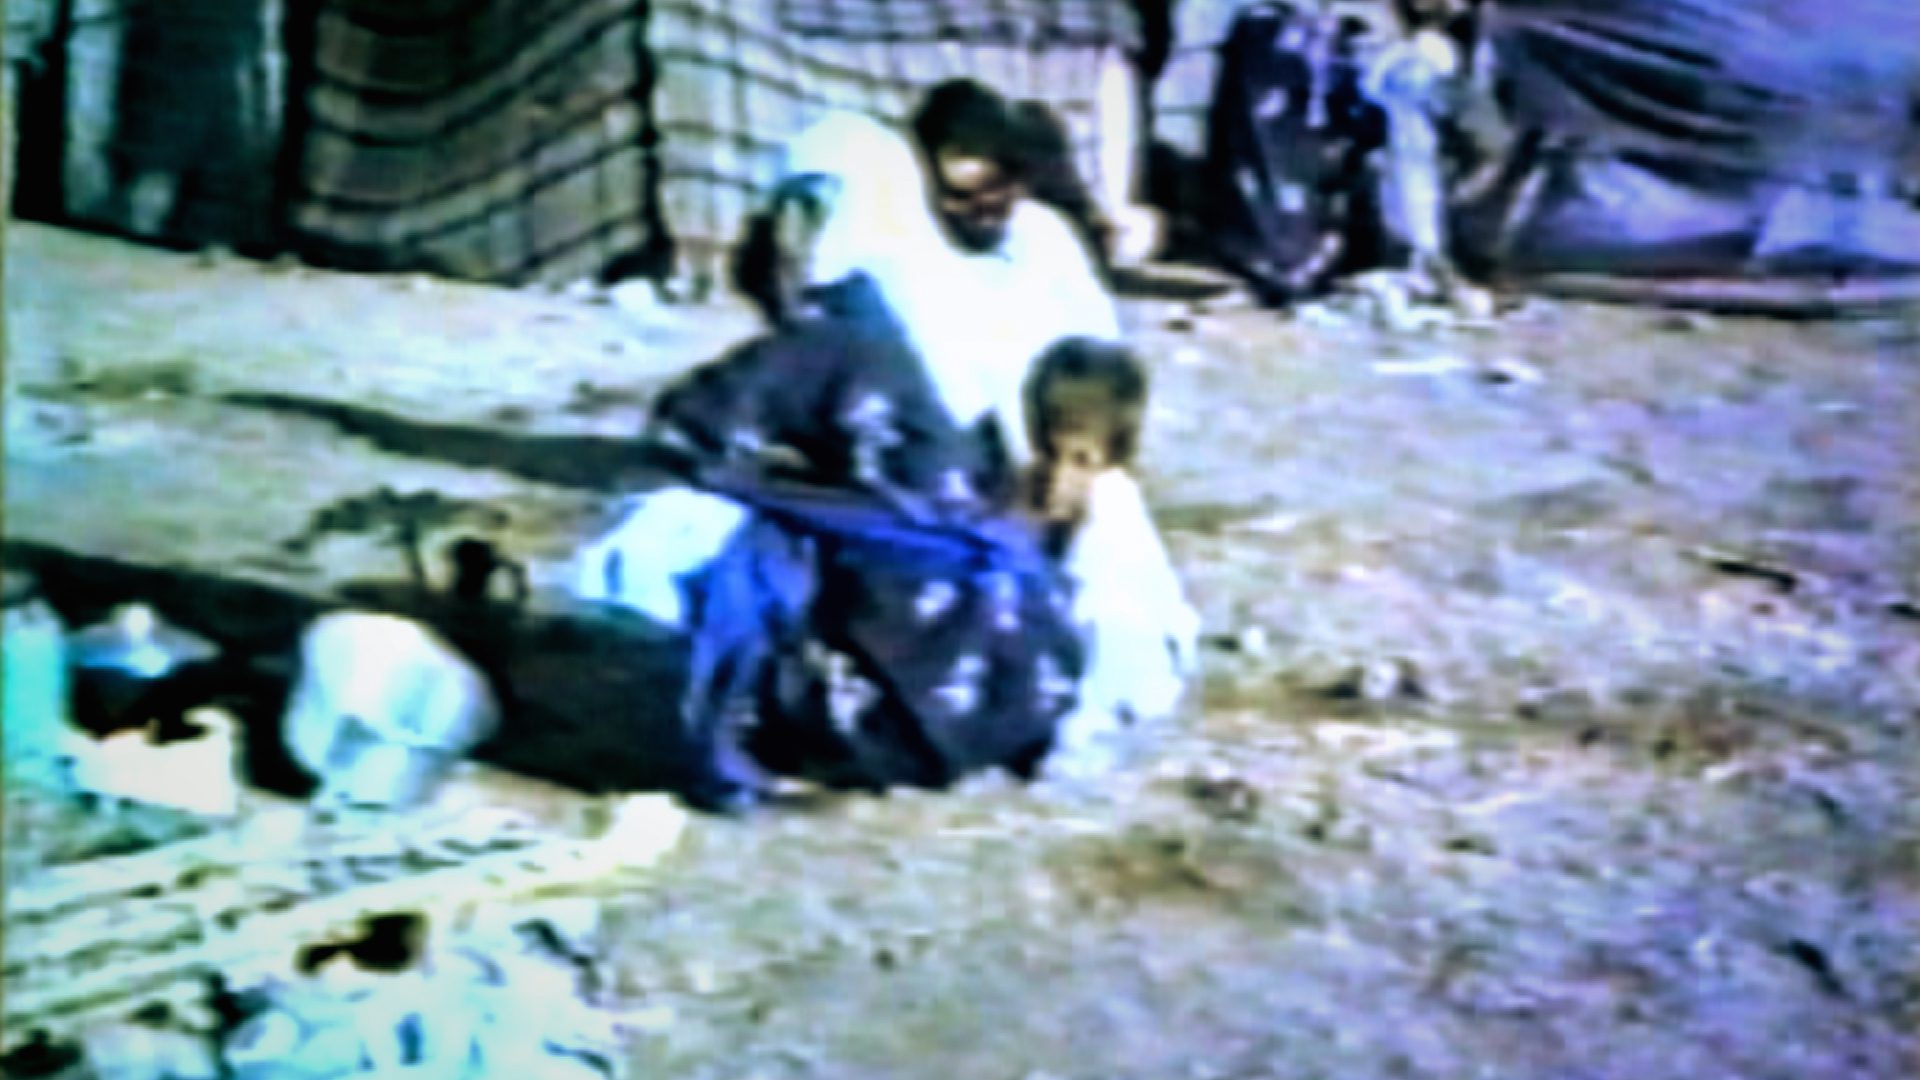 The Anfal survivors in the Baharka internment camp were the mothers, wives and children of Kurdish men executed by the Iraqi authorities. When they arrived they were supported by the local people of Erbil who brought supplies to the camp, but food and water were still in short supply and many of their children died of starvation.